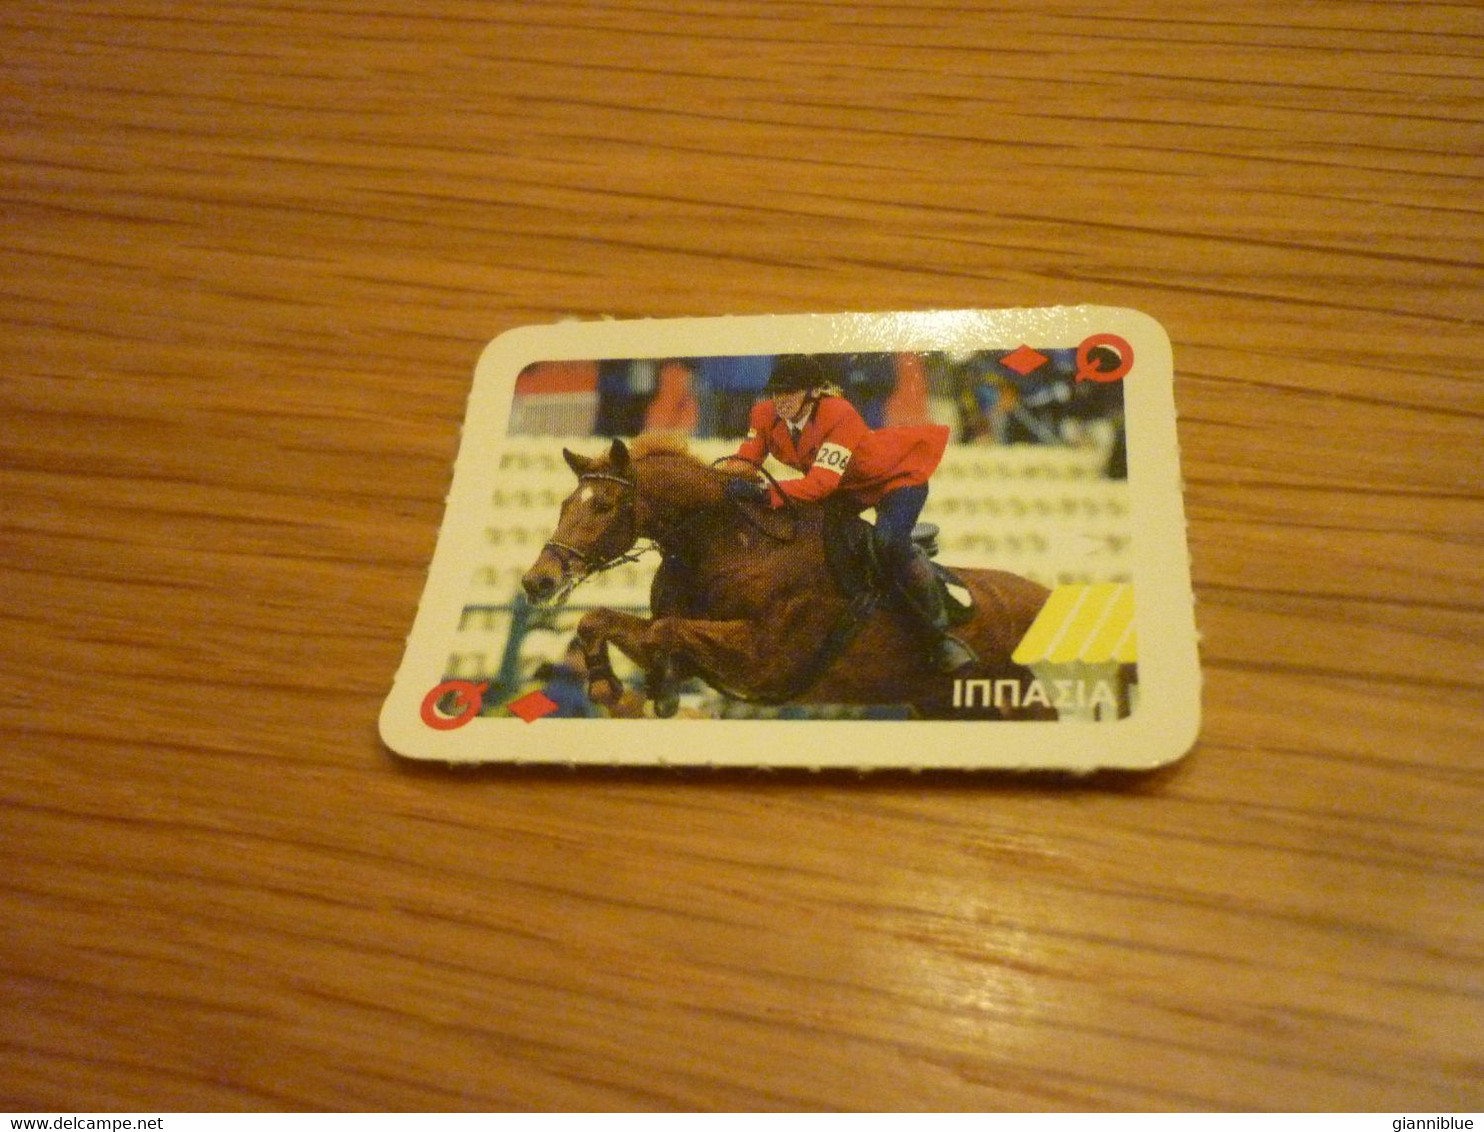 Equestrian Cheval Horse Olympic Games Greek Mini Trading Playing Card - Equitation